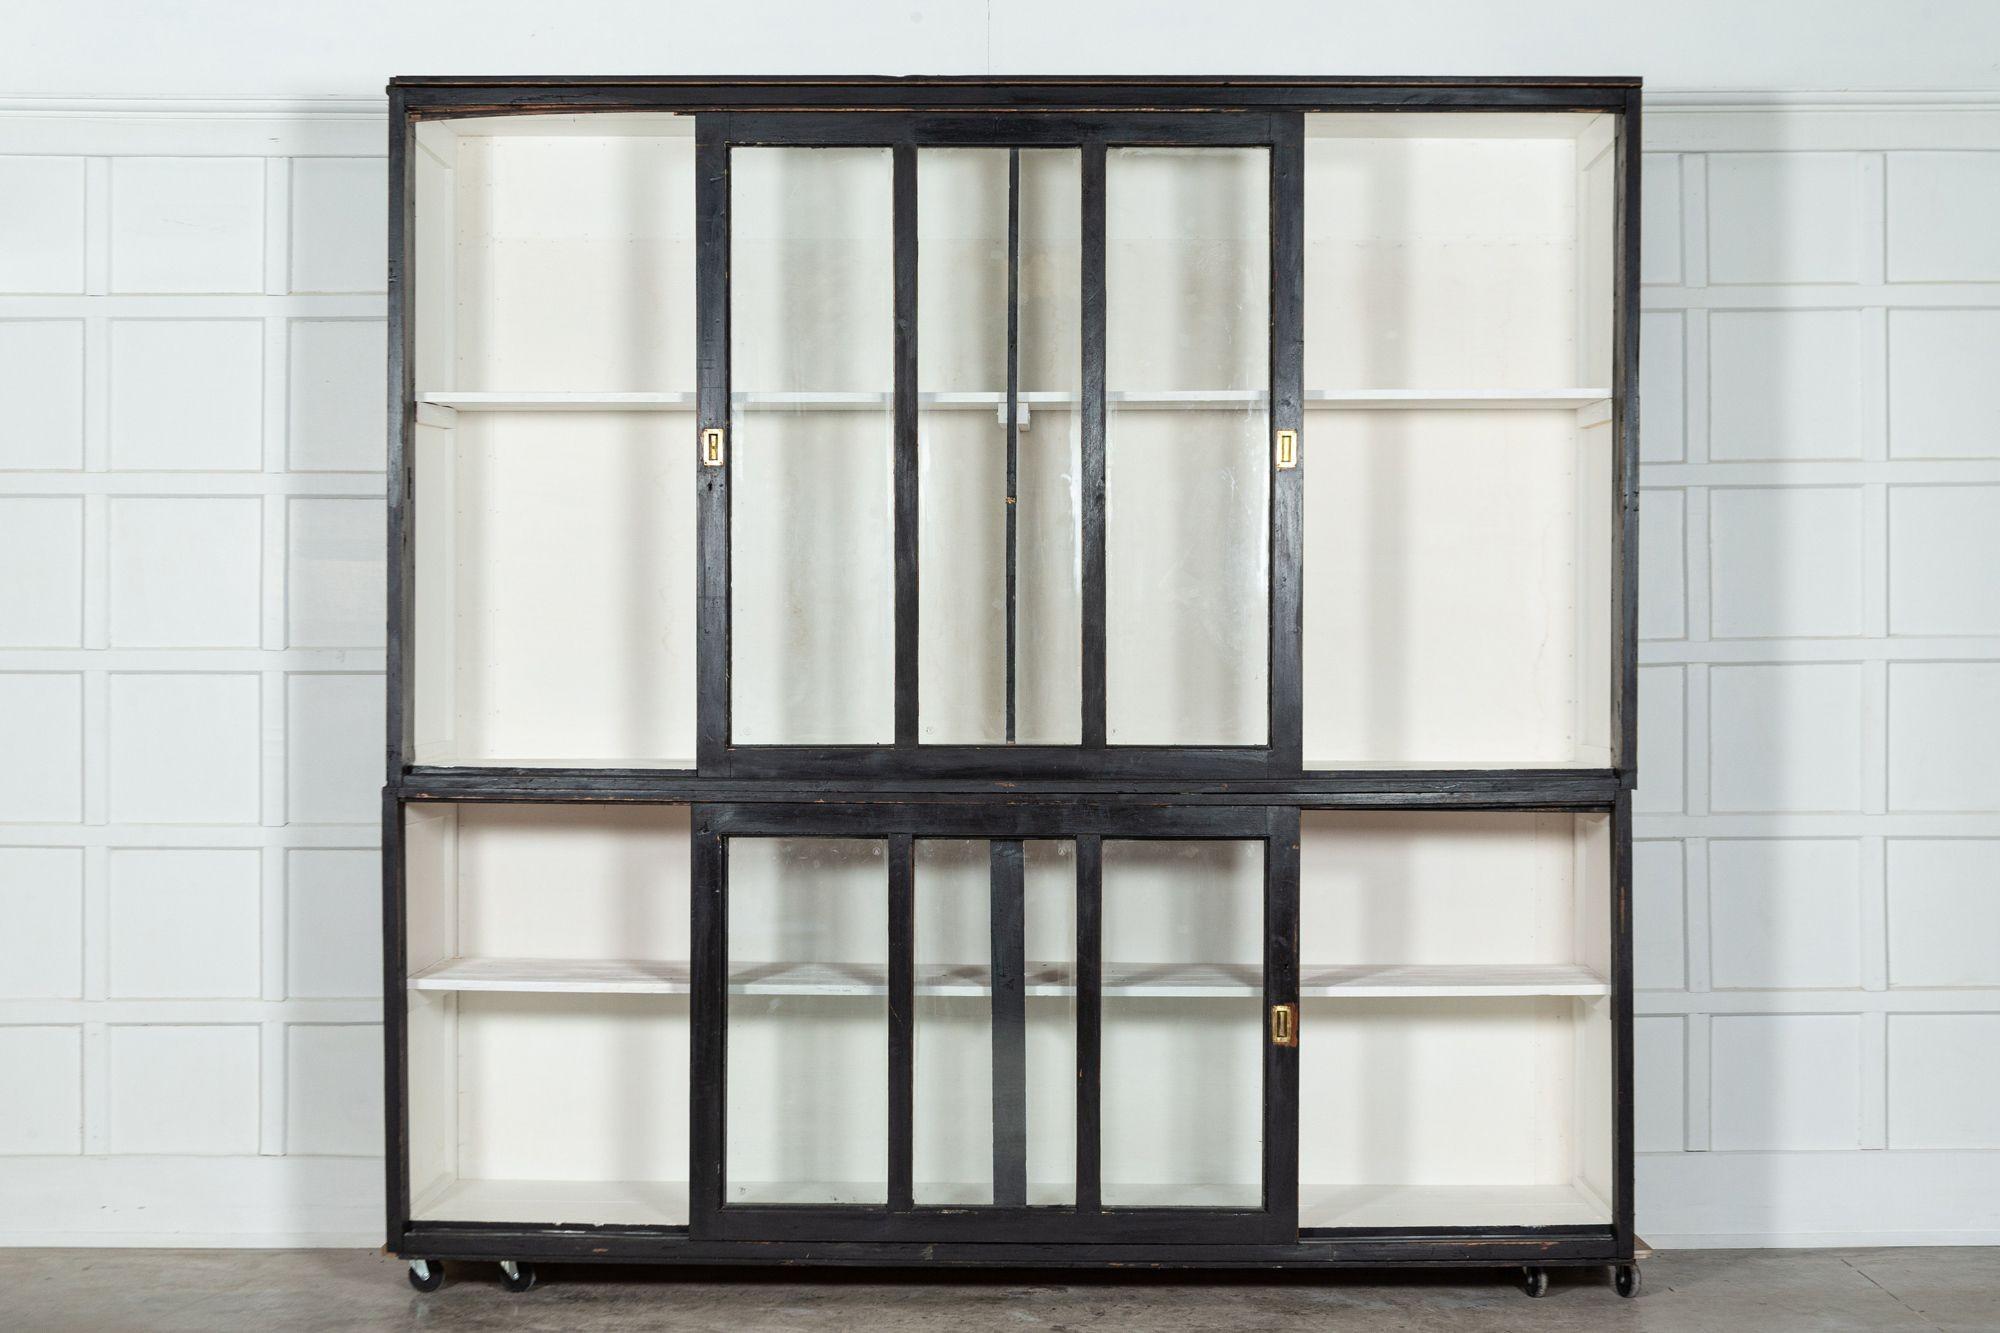 circa 1900
Monumental English Ebonised Glazed Housekeepers / Bookcase Cabinet
(All Glazing Safety Glass)
Price is each (x12 available)
(Extra shelves can be made)
sku 1530
Together W259 x D63 x H247cm
Base W259 x D63 x H100cm
Top W259 x D63 x H147